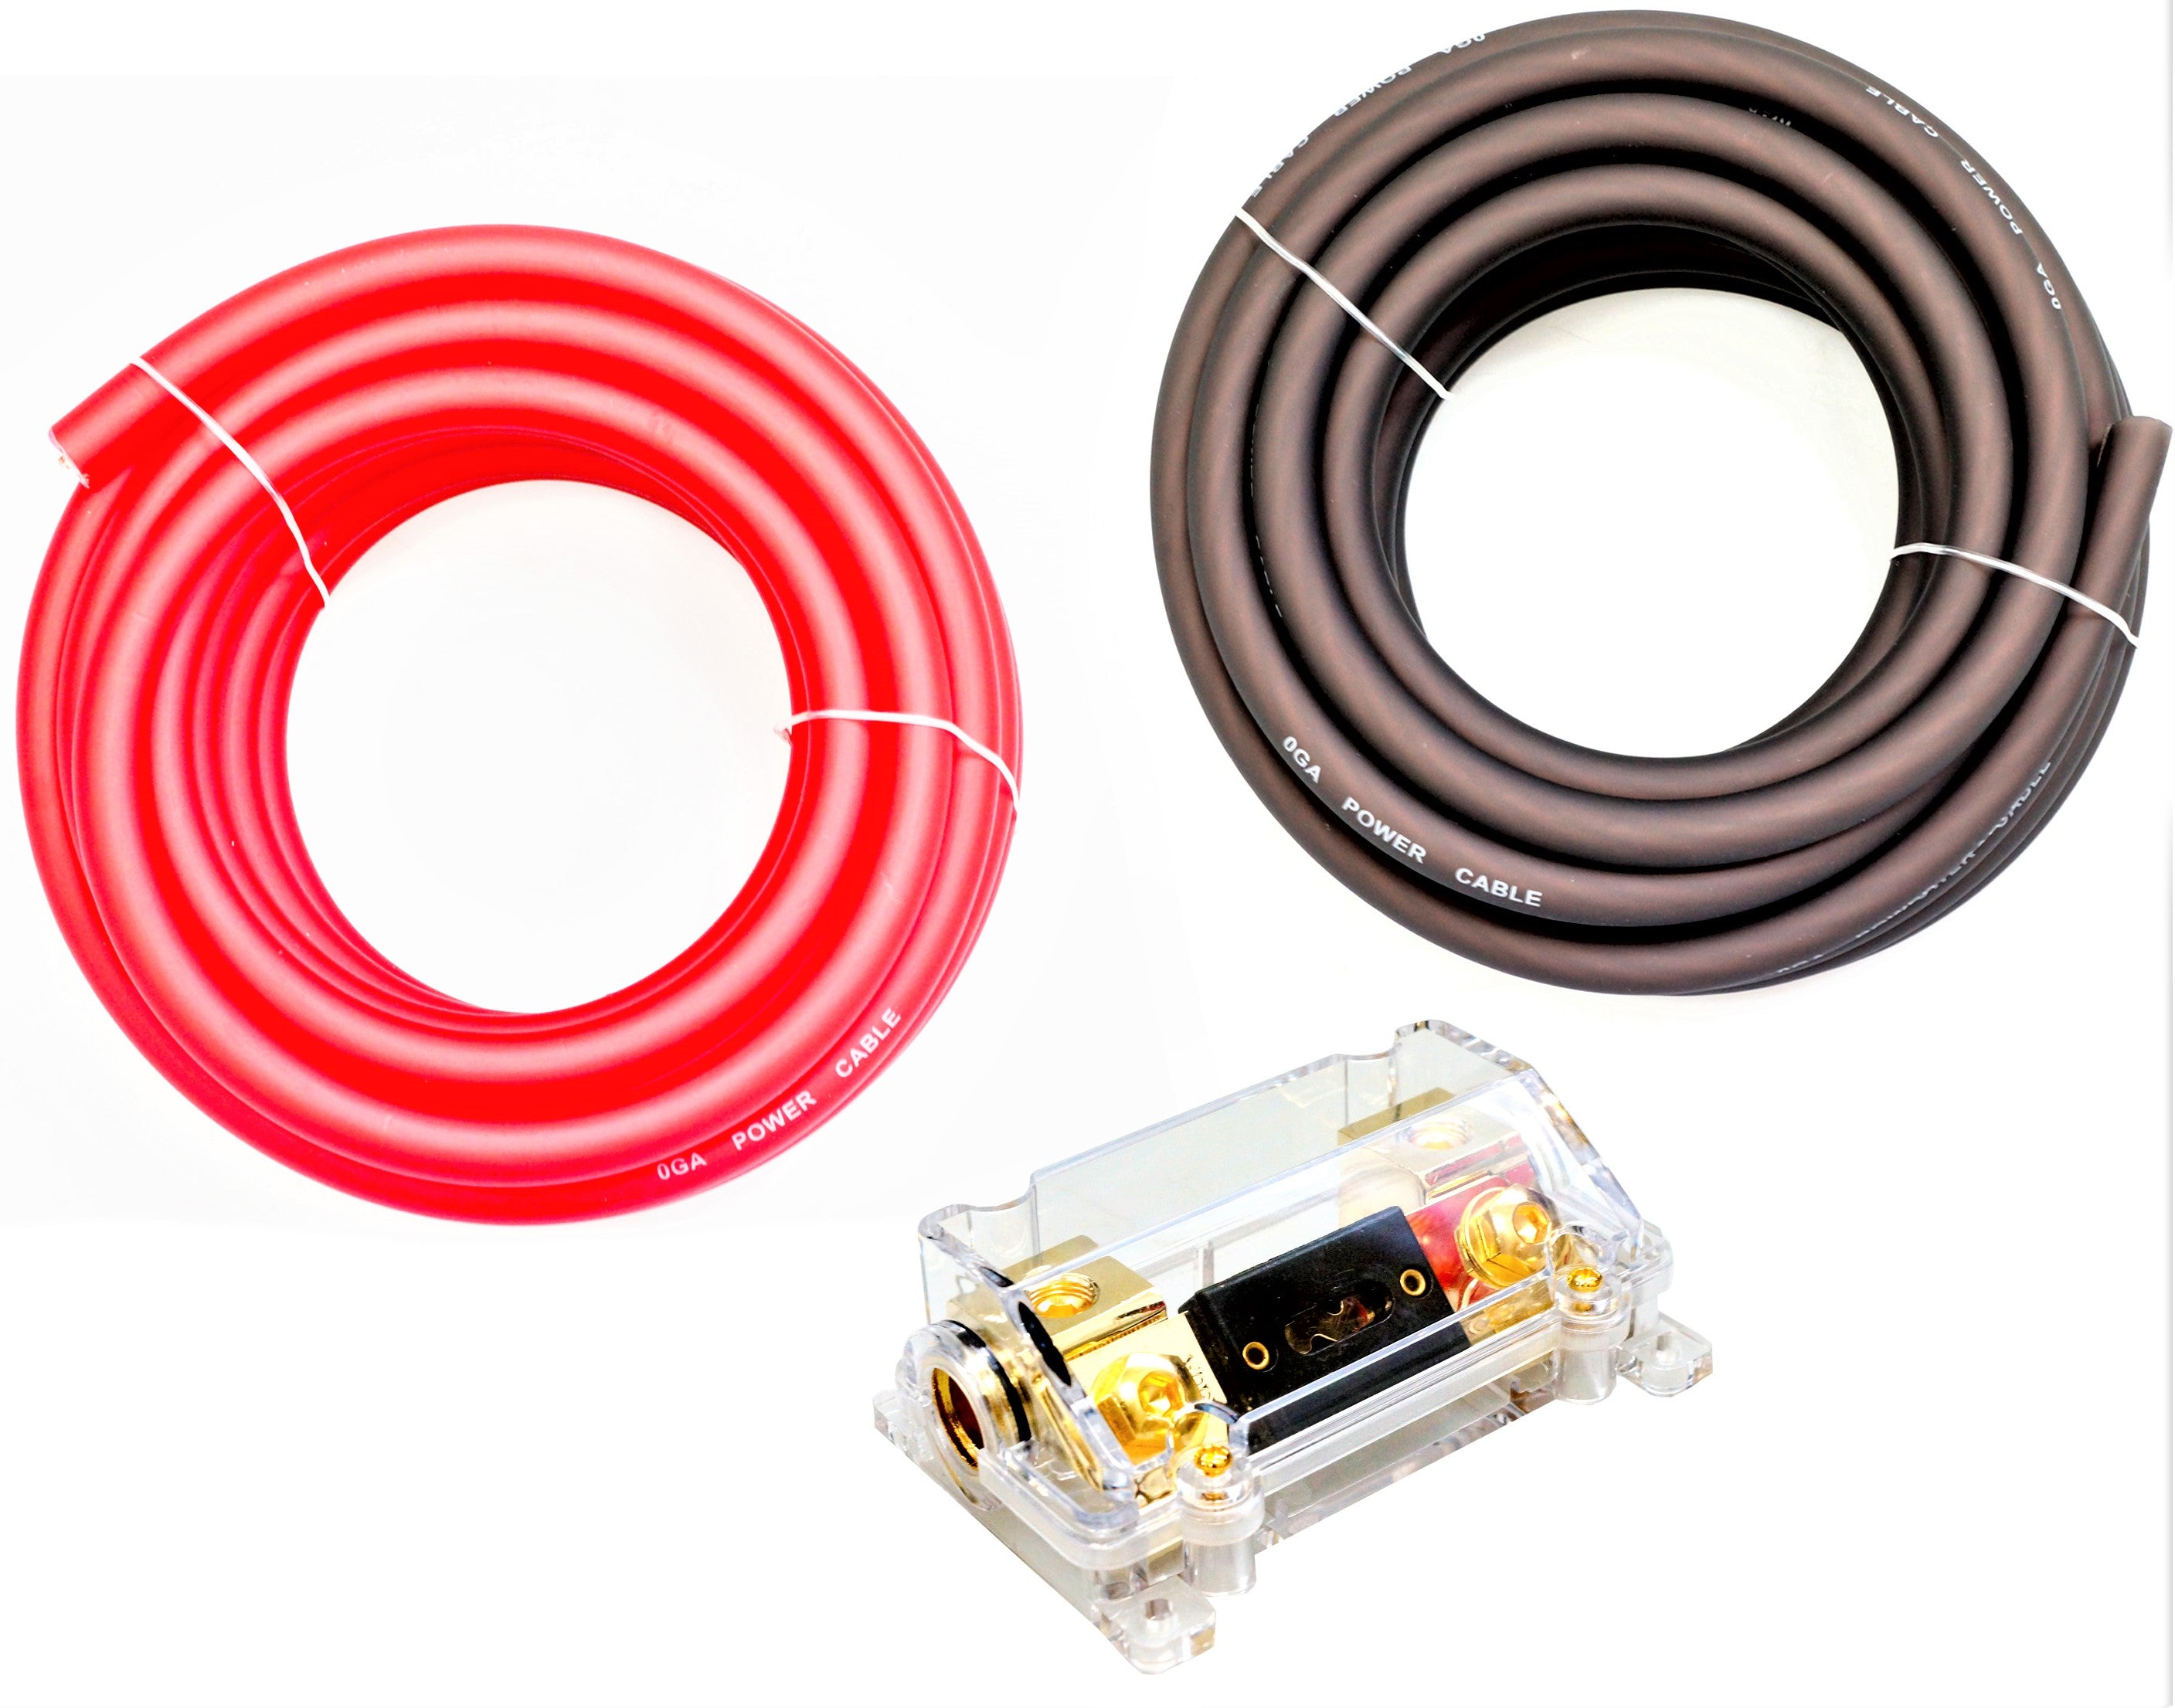 Absolute KIT025RB 0 Gauge 50' Red/Black Power/Ground Wire  Amplifier Amp Kit